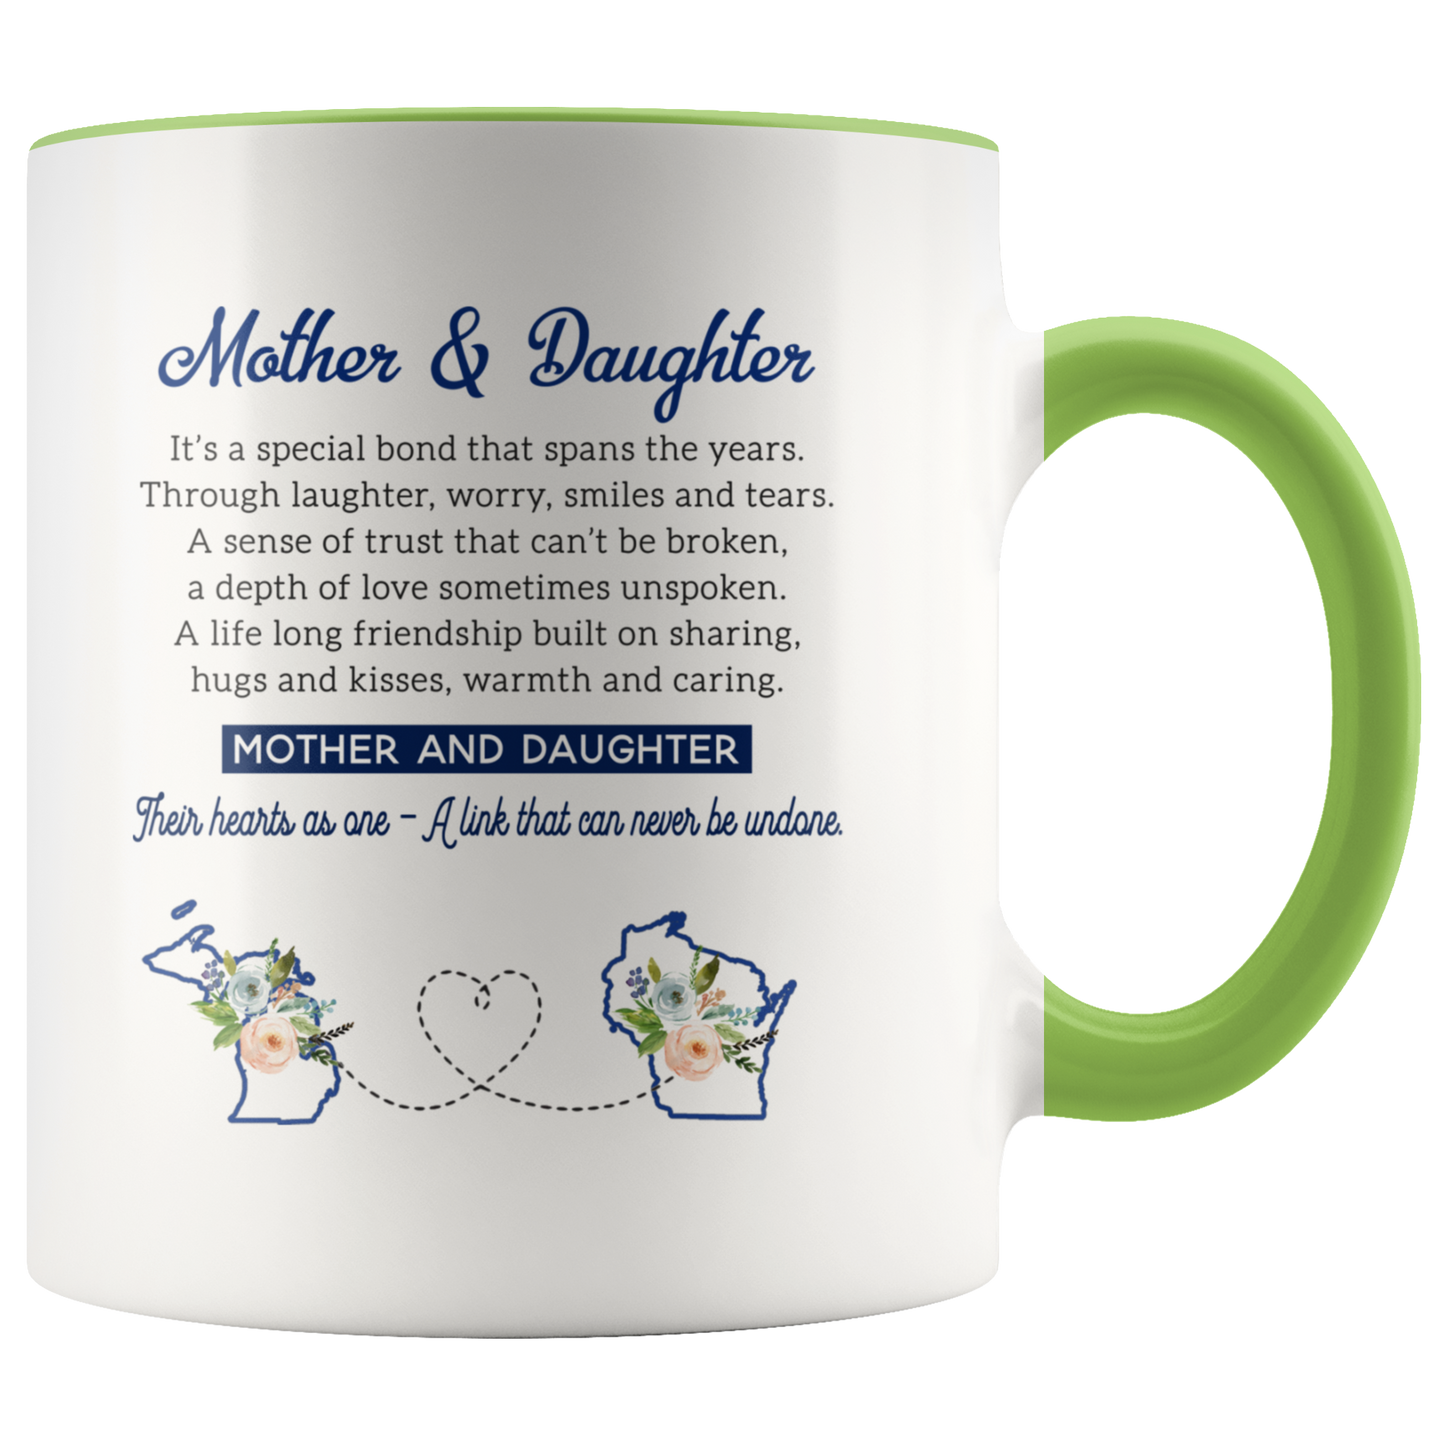 ND-21357706-sp-23145 - Long Distance Mom And Daughter Gifts - Mother And Daughter.